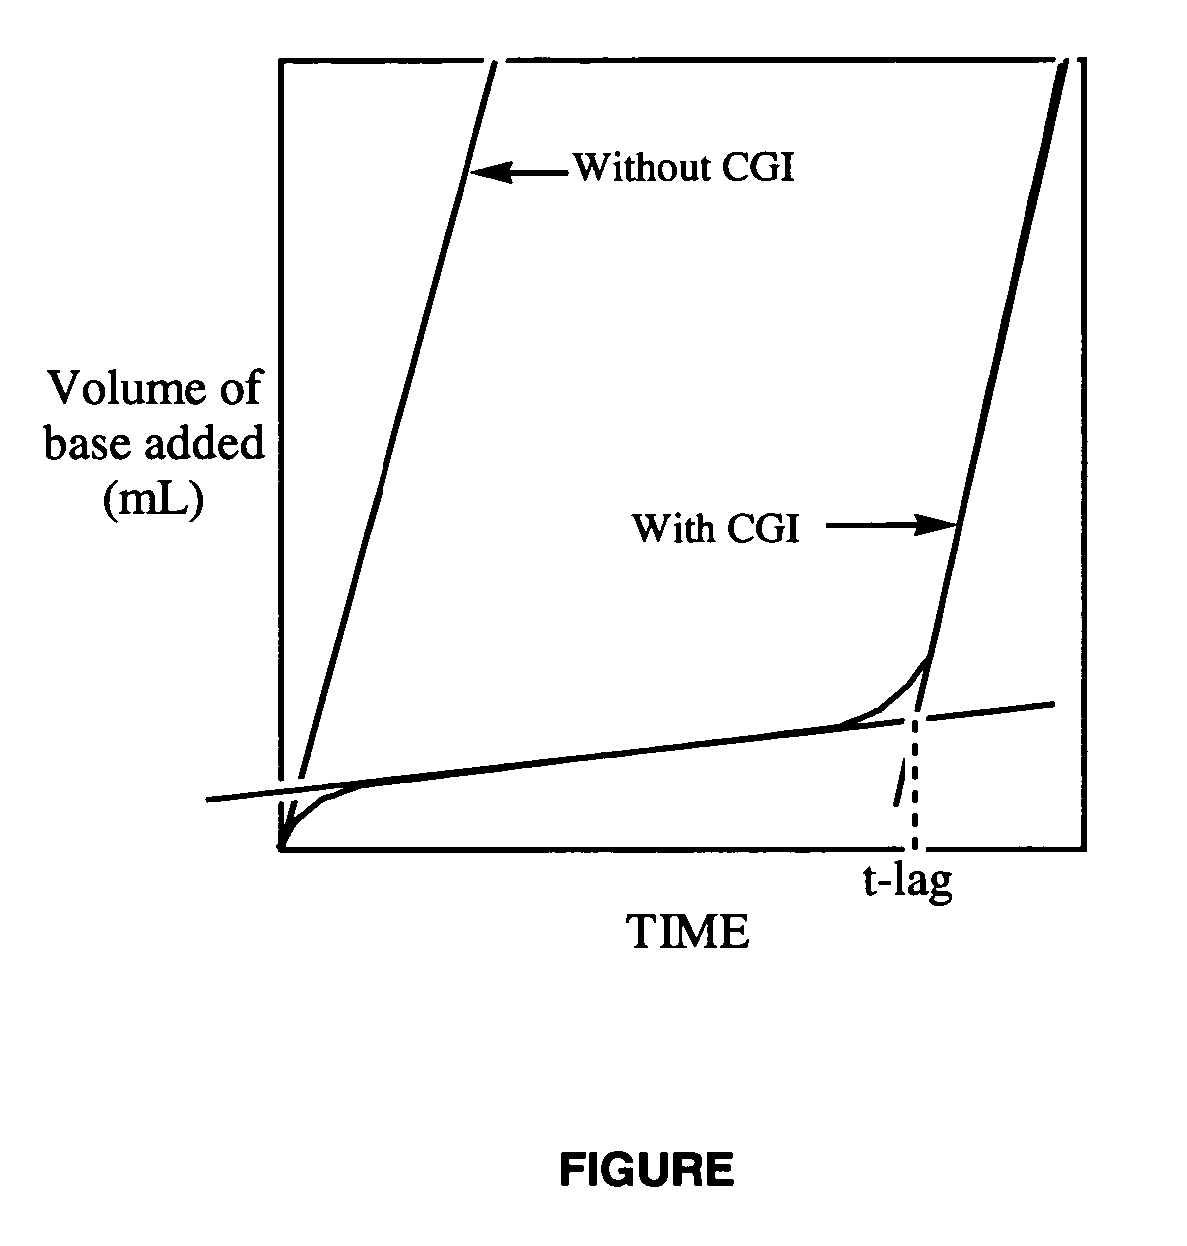 Rinse-added fabric treatment composition, kit containing such, and method of use therefor